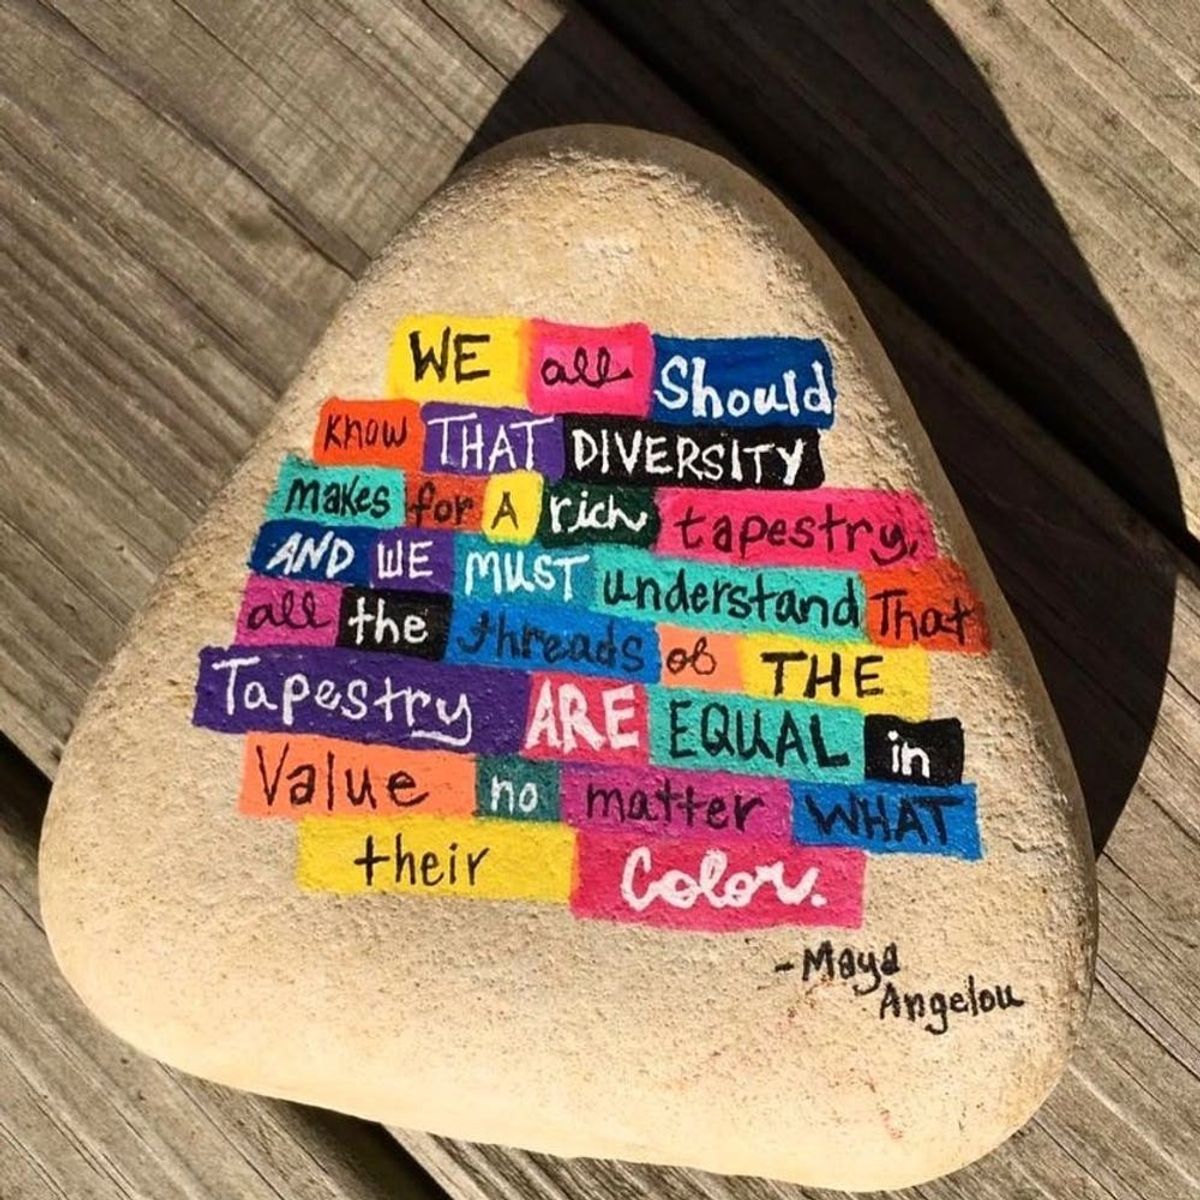 The Kindness Rocks Project Helps People Find Uplifting Messages in Unexpected Places